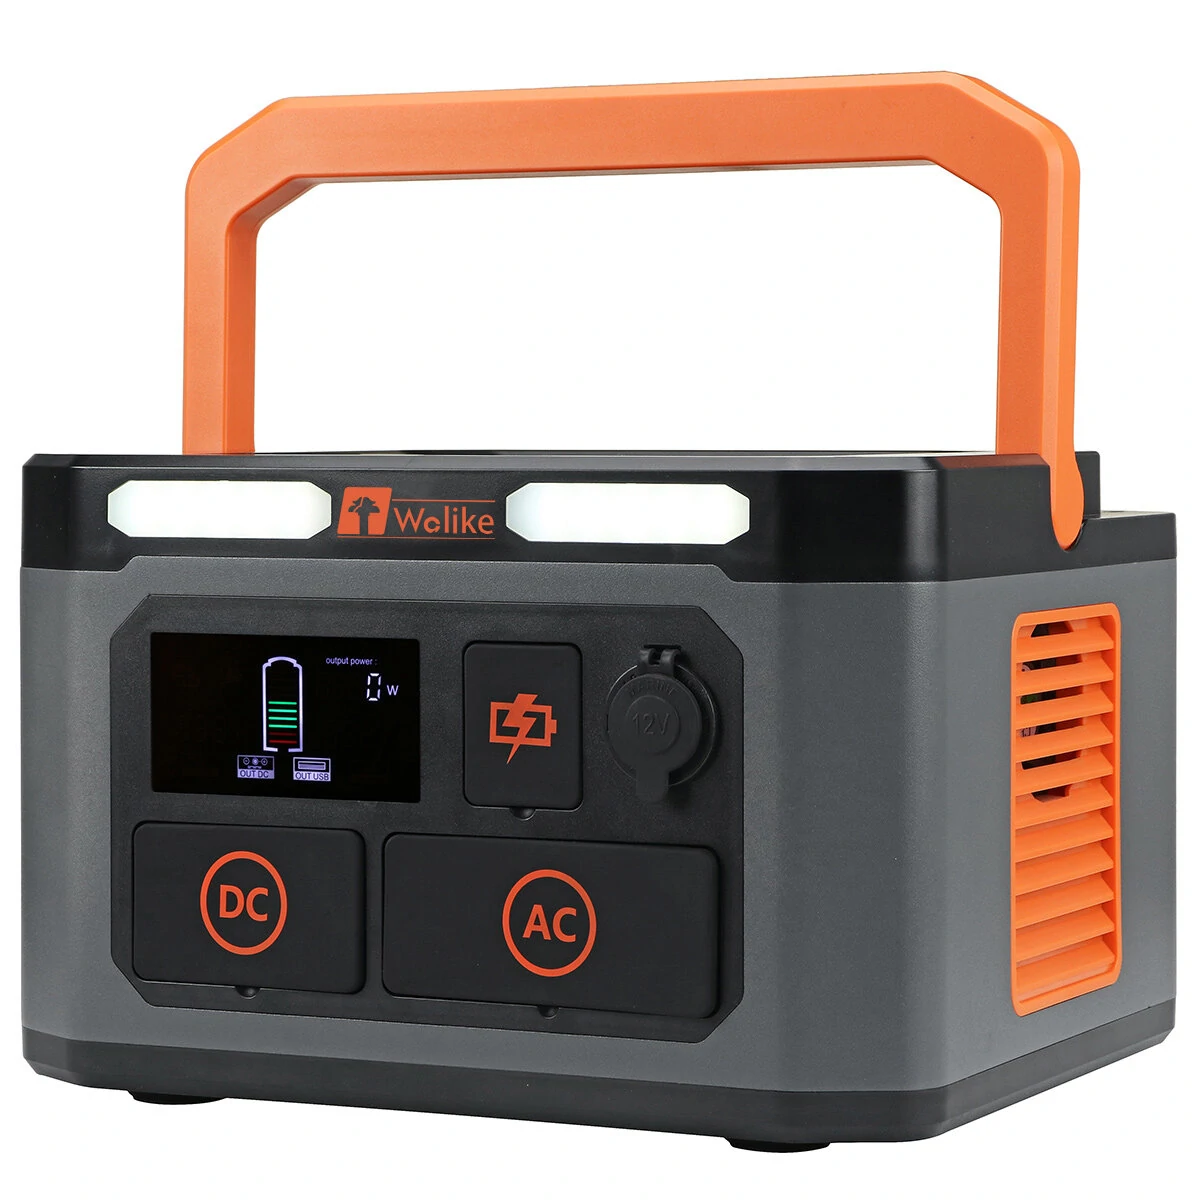 Wolike CN-1000 999WH 270000mAh Portable Power Station 1000W with AC/DC/USB/Car Charger for Outdoor Home Emergency Electric Power Source - EU Plug